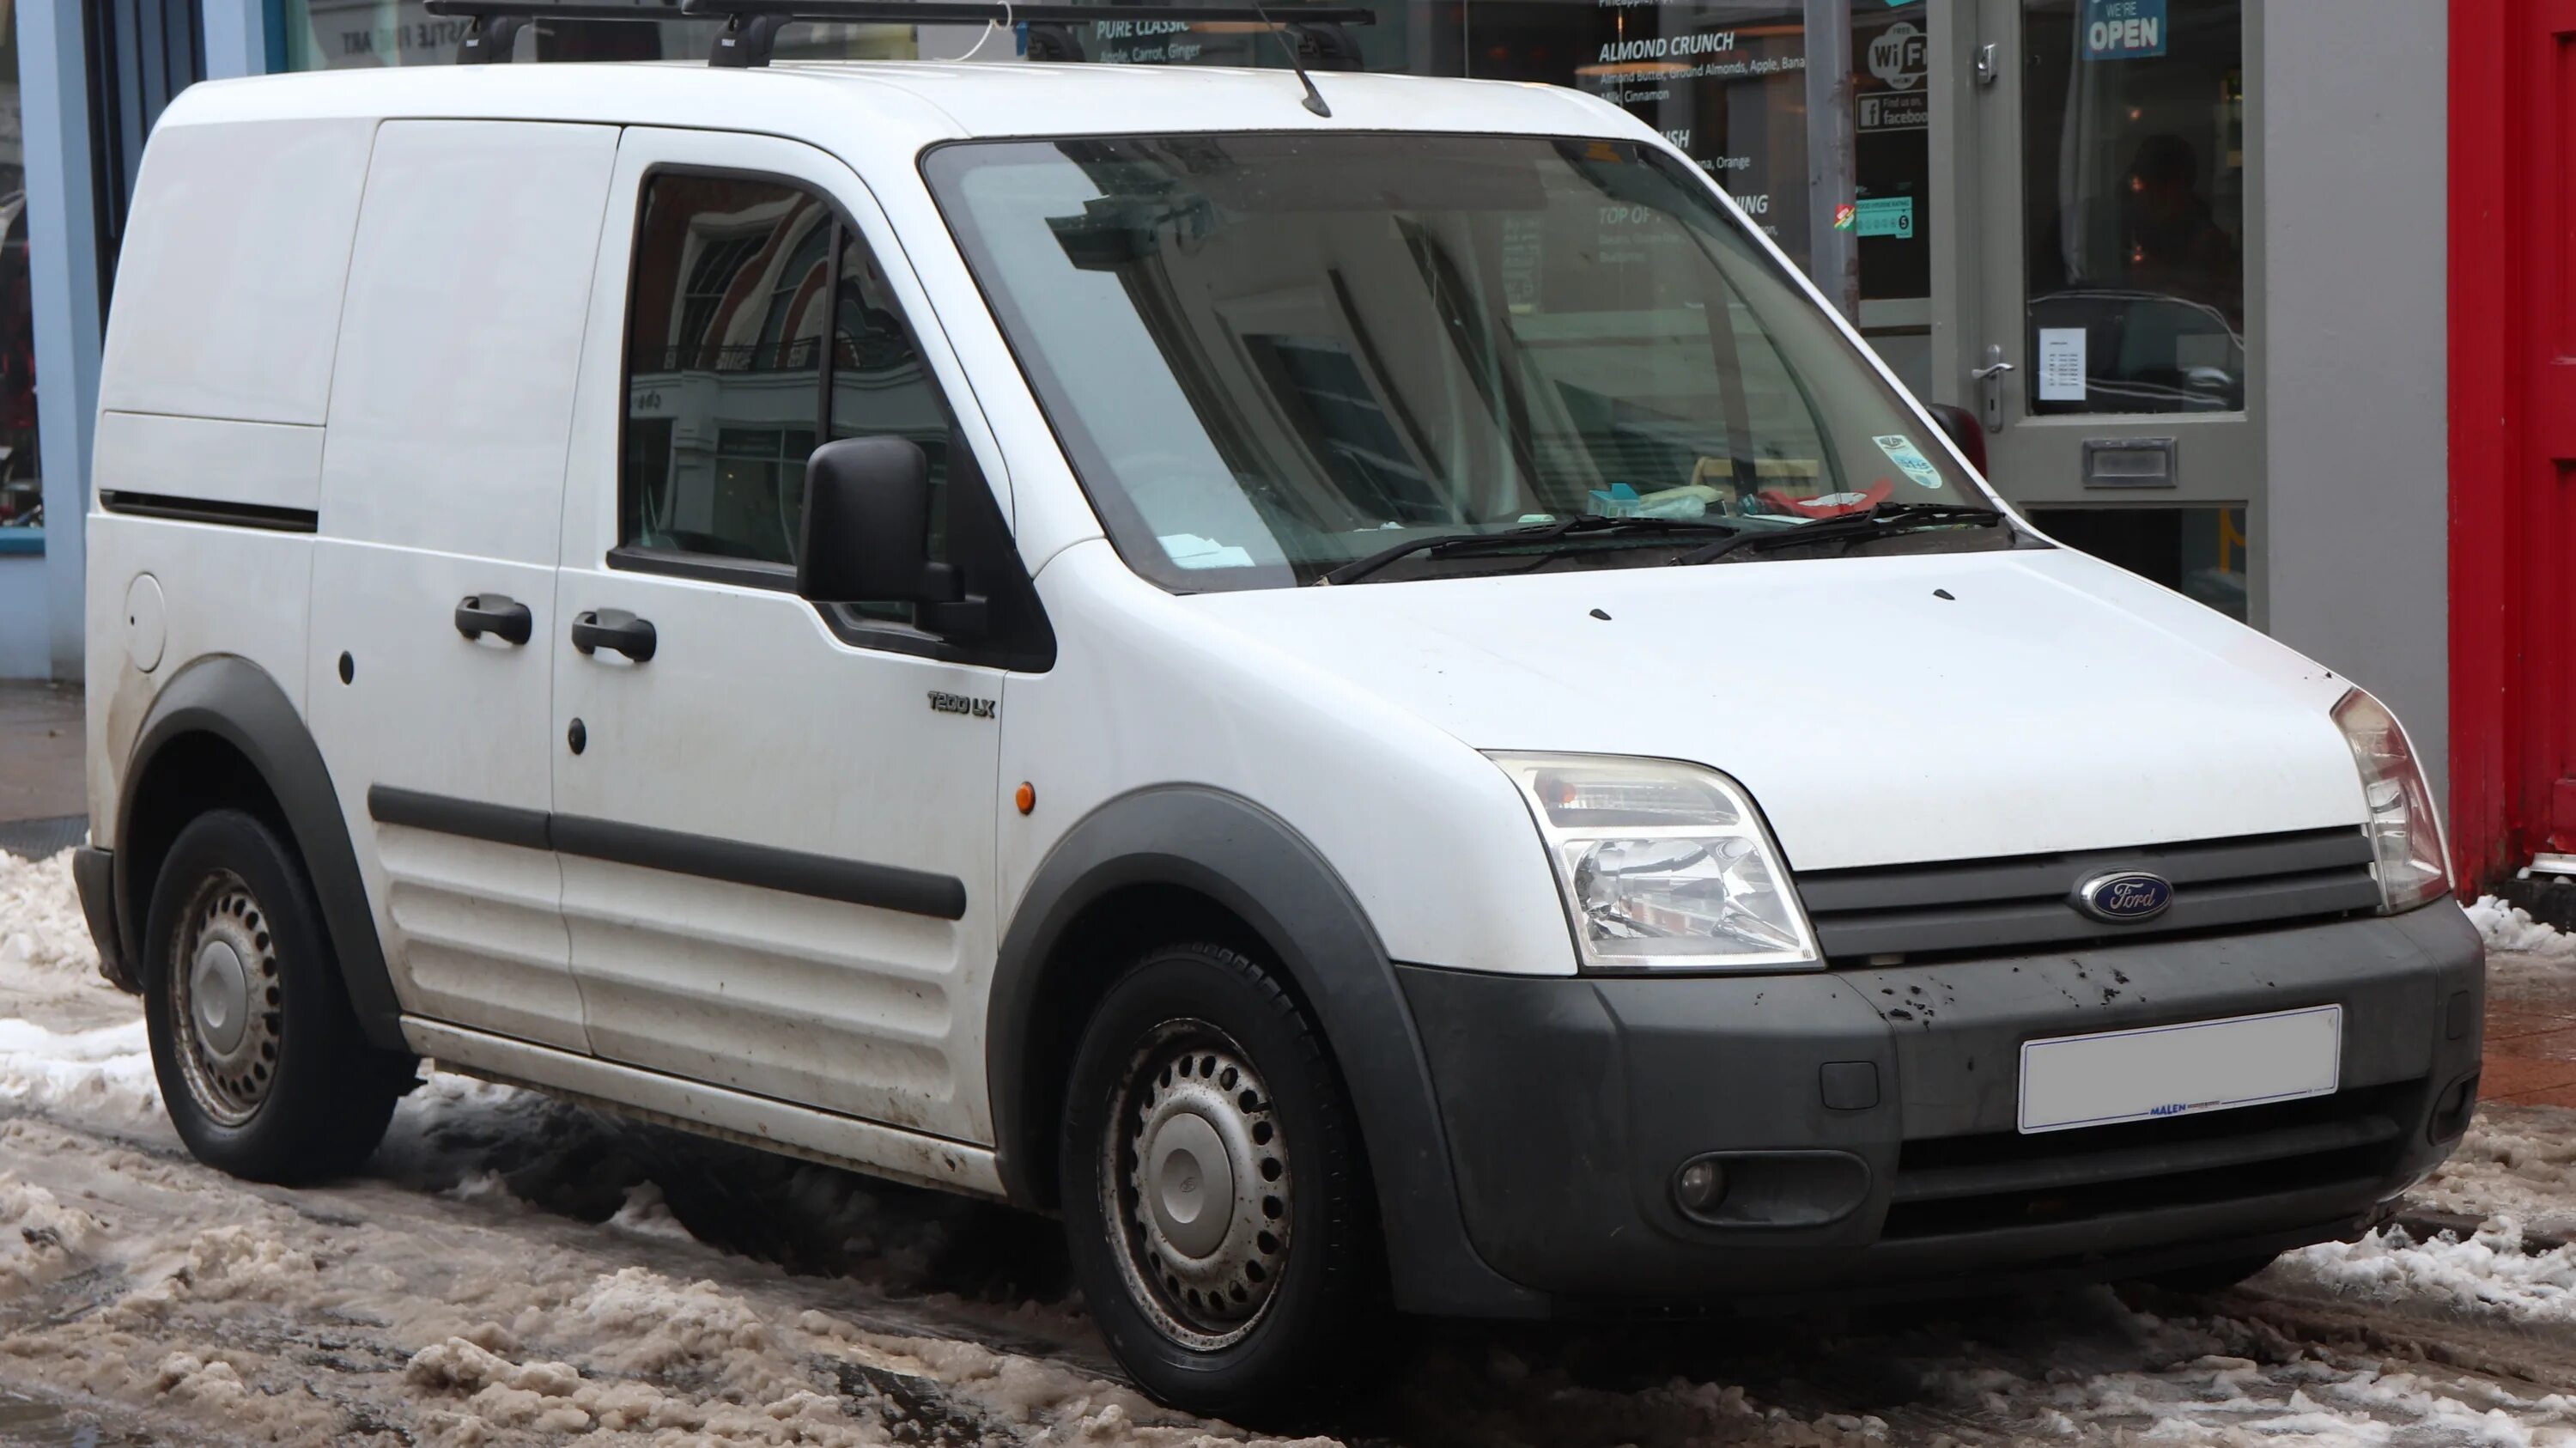 Connect 200. Ford Transit 2005 connect. Ford Transit connect t200. Форд Транзит Коннект 2009. Ford Transit connect 200s.